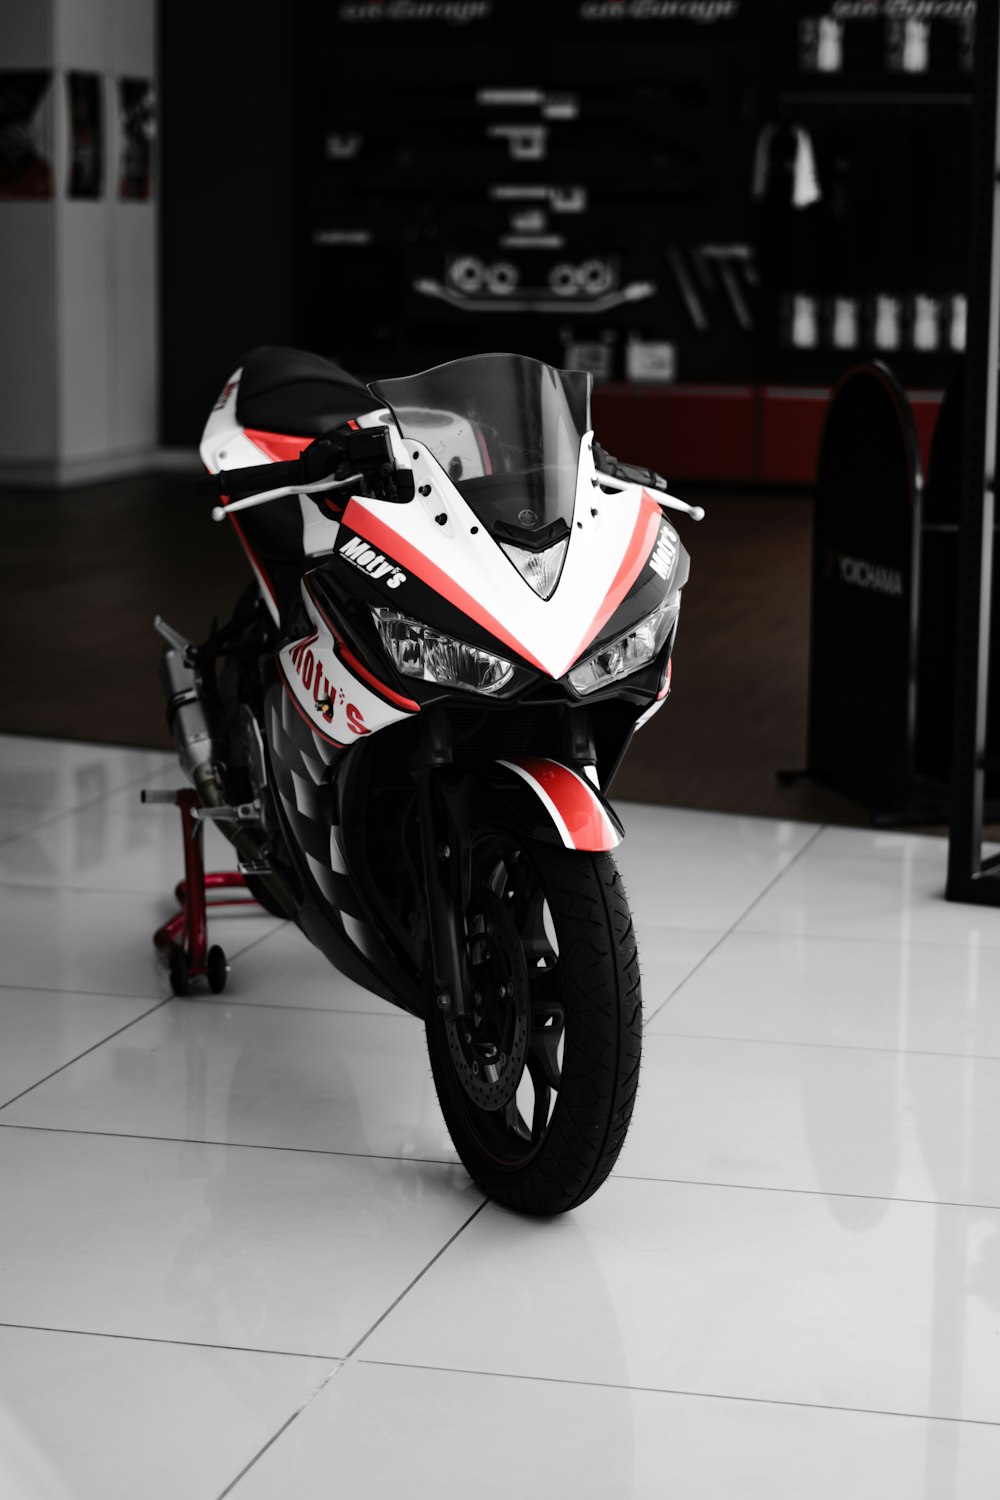 a motorcycle parked in a showroom